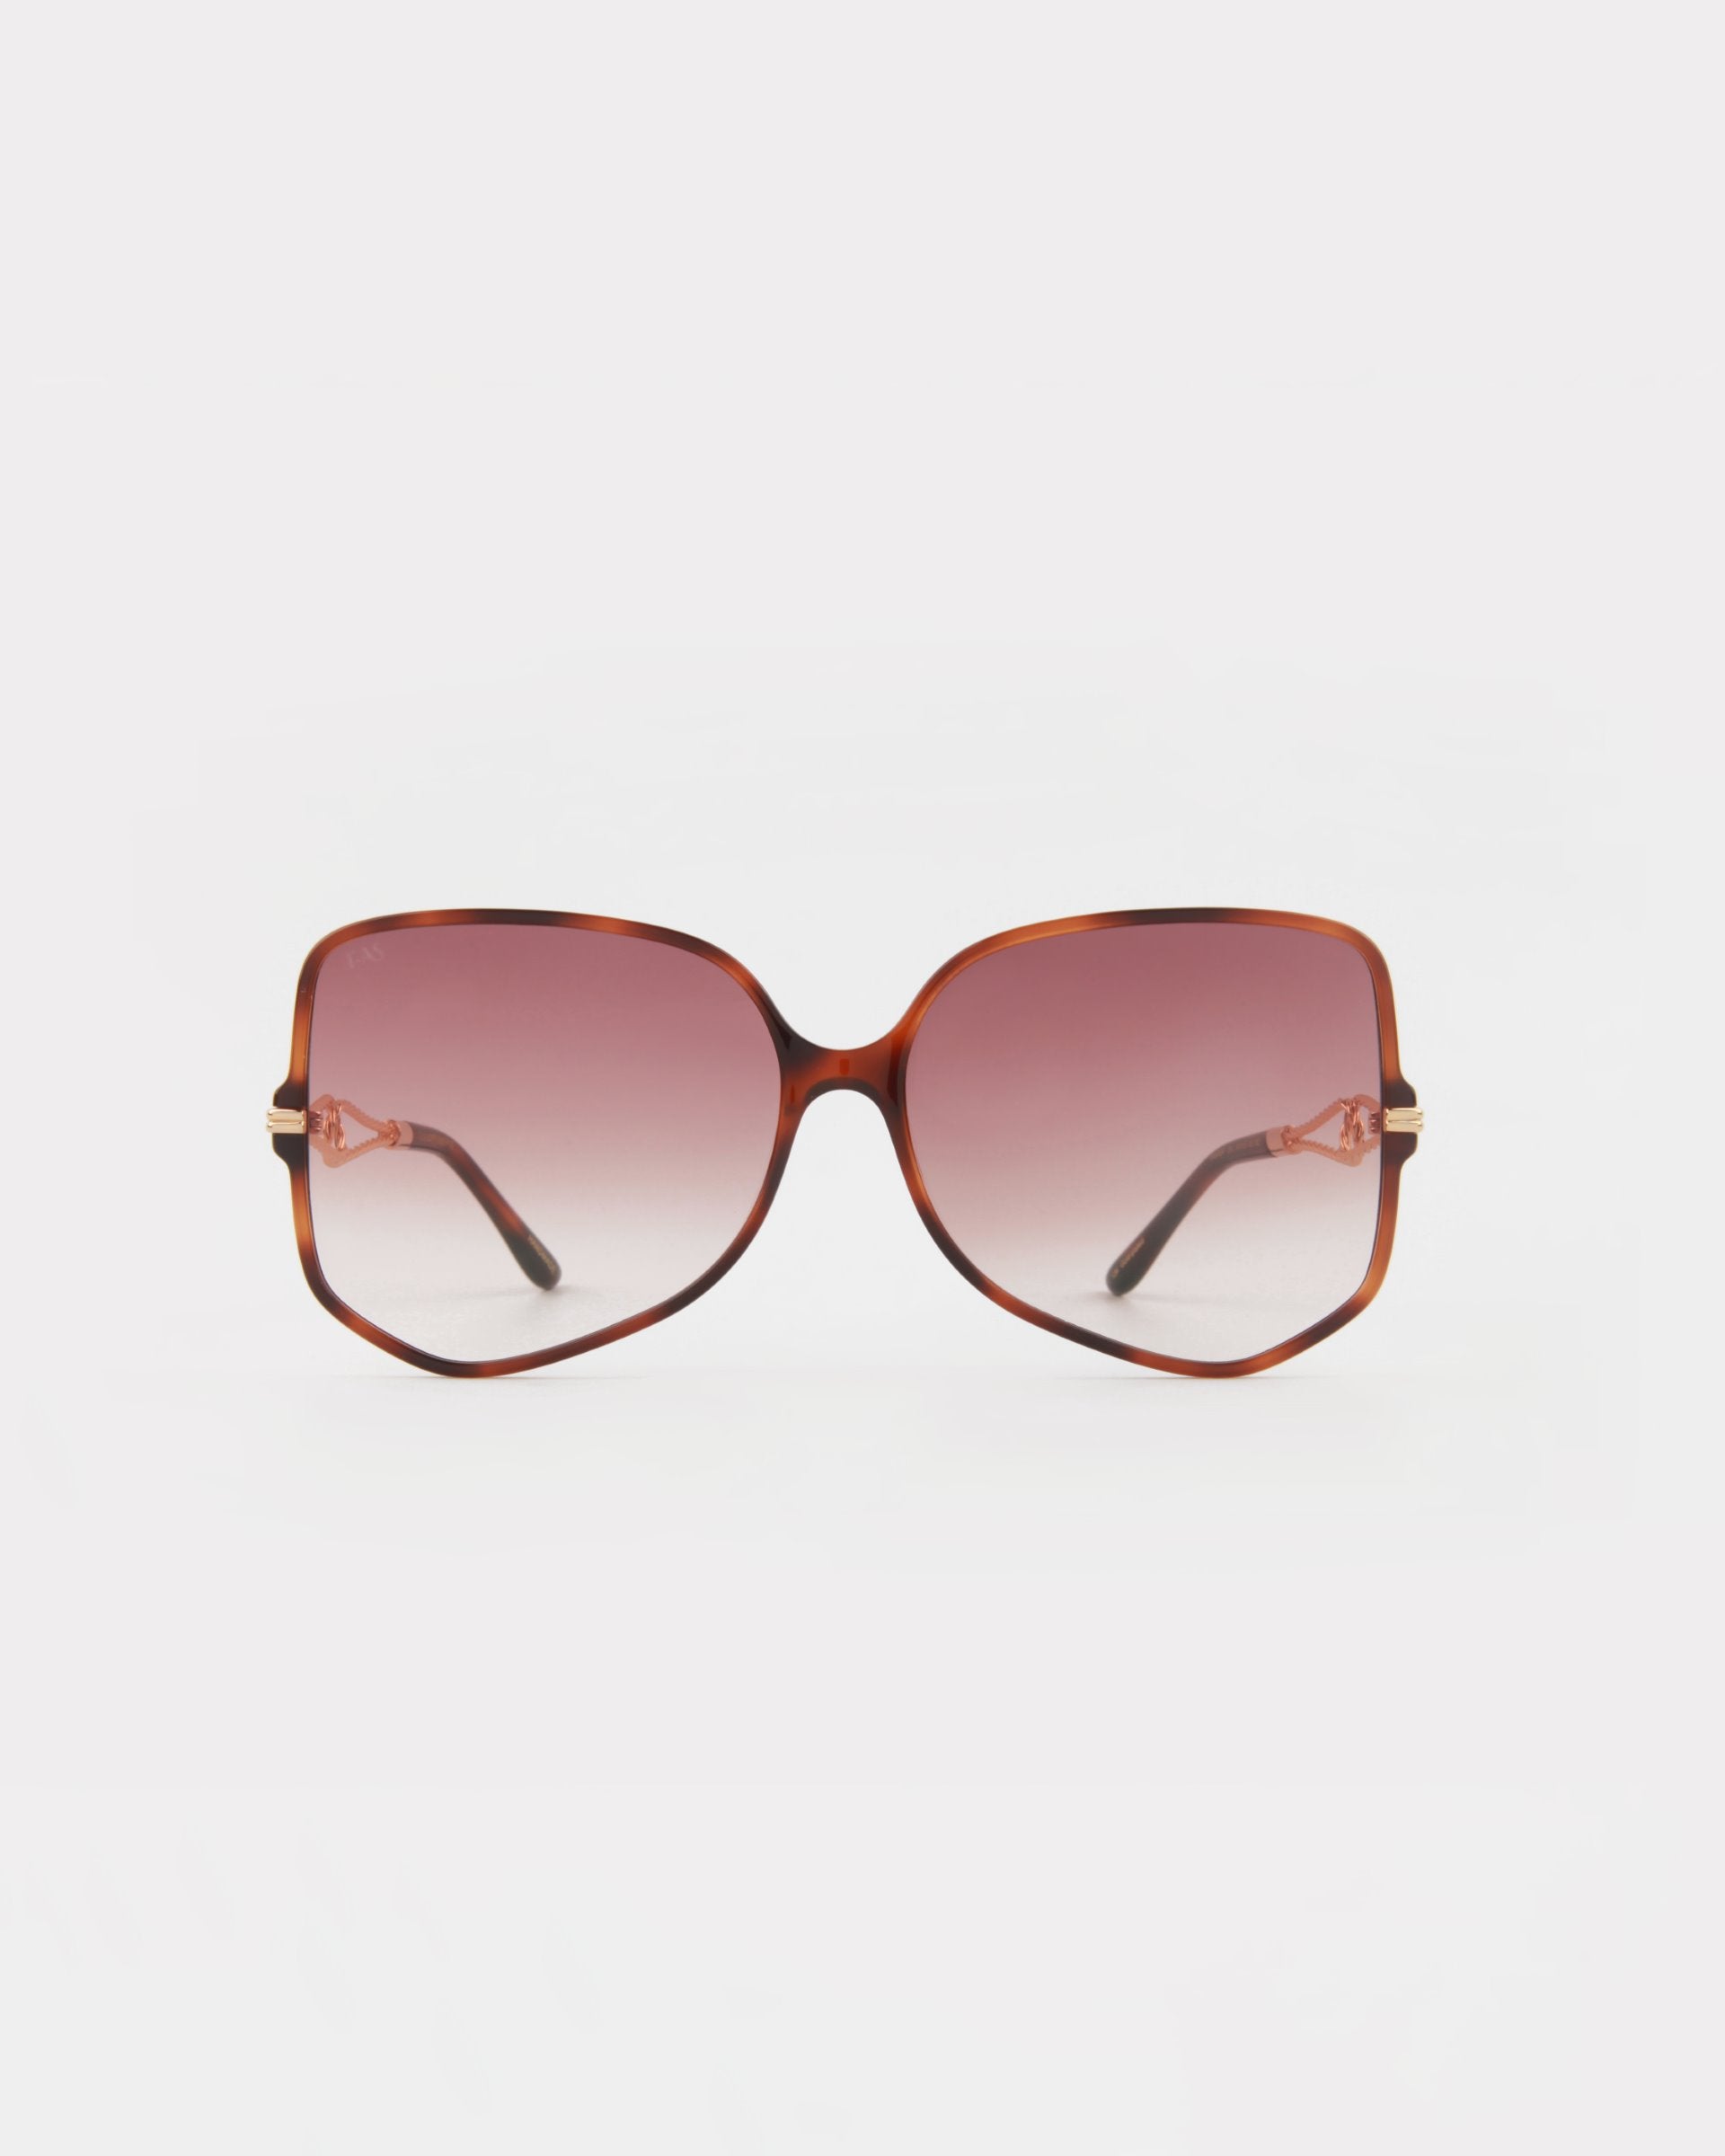 A pair of Voyager oversized square-shaped sunglasses from For Art's Sake® with brown-gradient lenses and tortoiseshell, gold-plated frames. The arms of the glasses are thin and match the frame color. Offering UVA & UVB protection, this stylish eyewear is set against a plain white background.